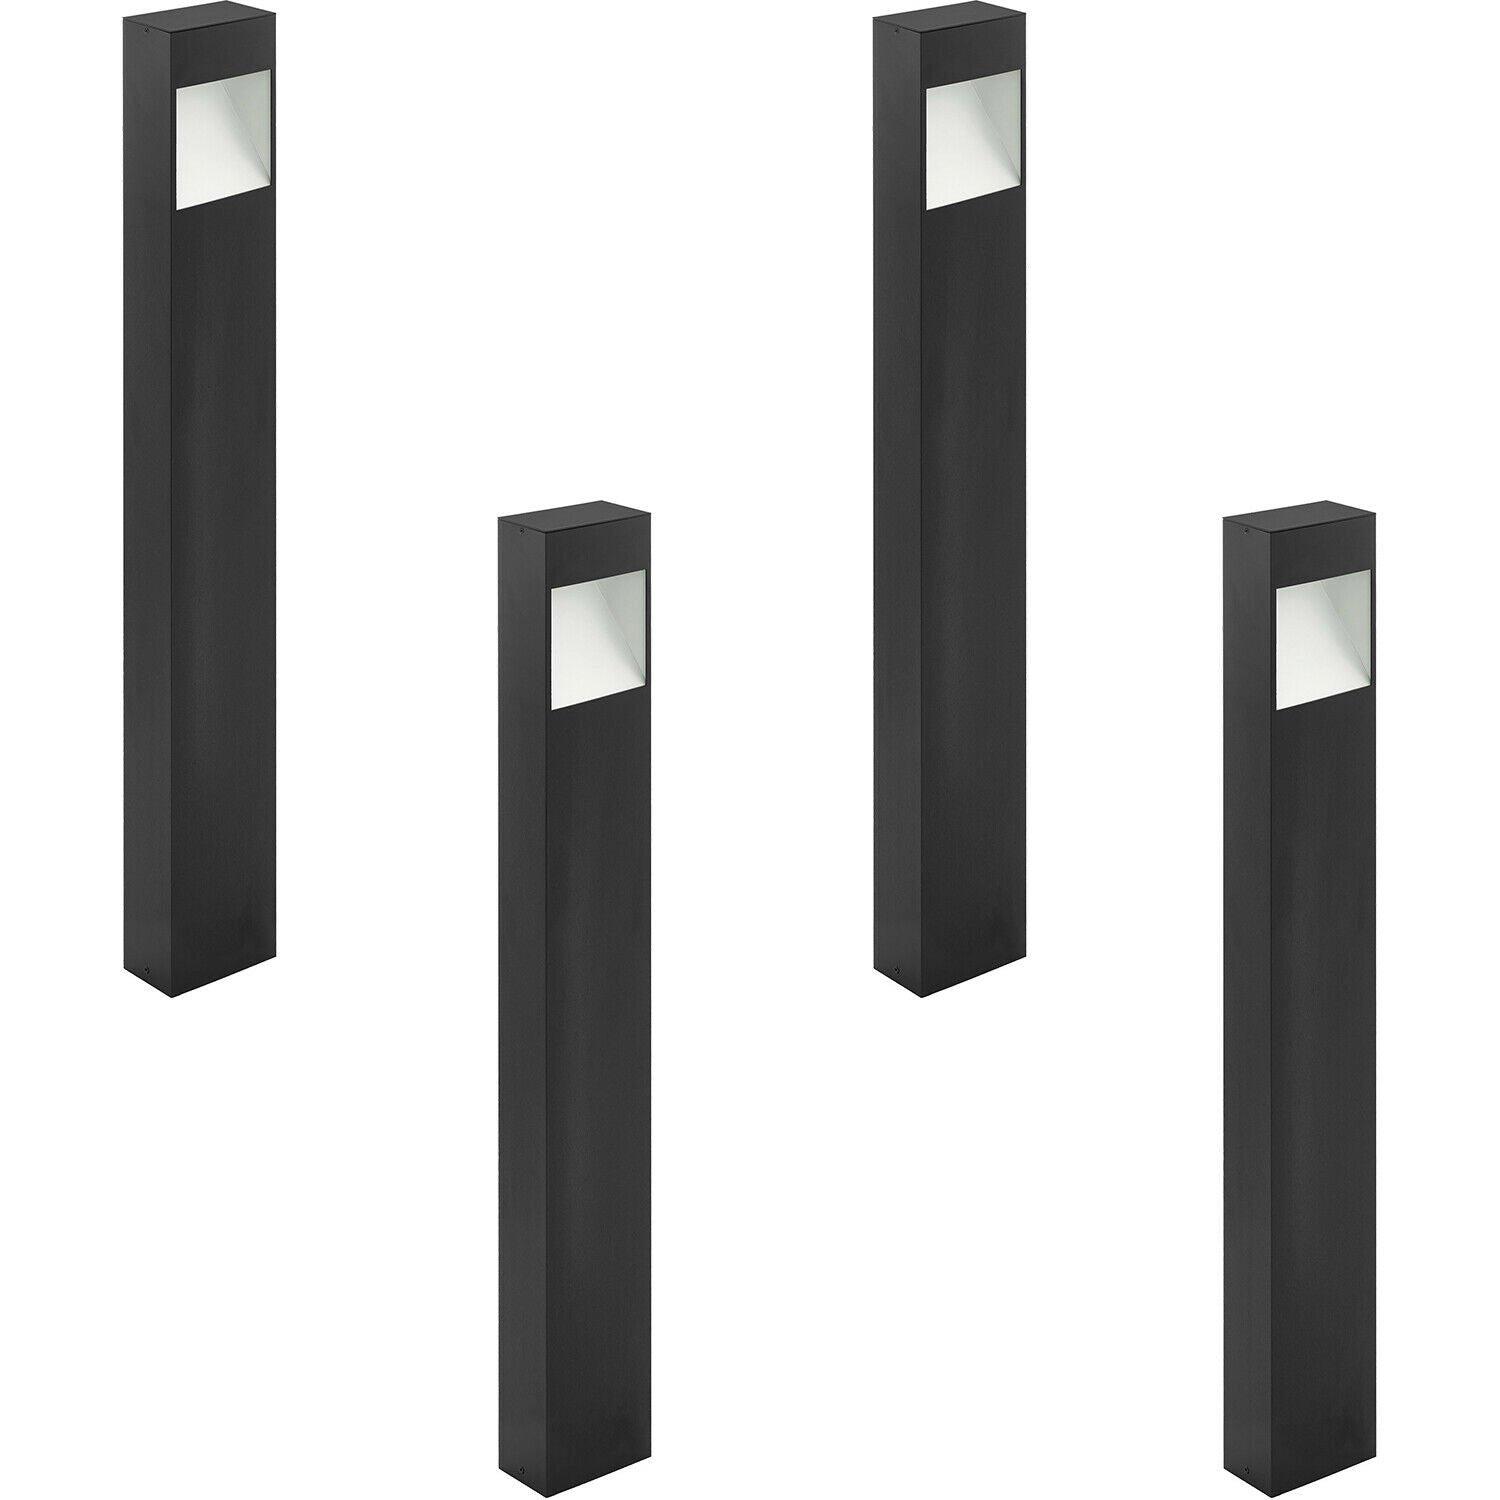 4 PACK IP44 Outdoor Pedestal Light Anthracite Tall Square Post 10W LED